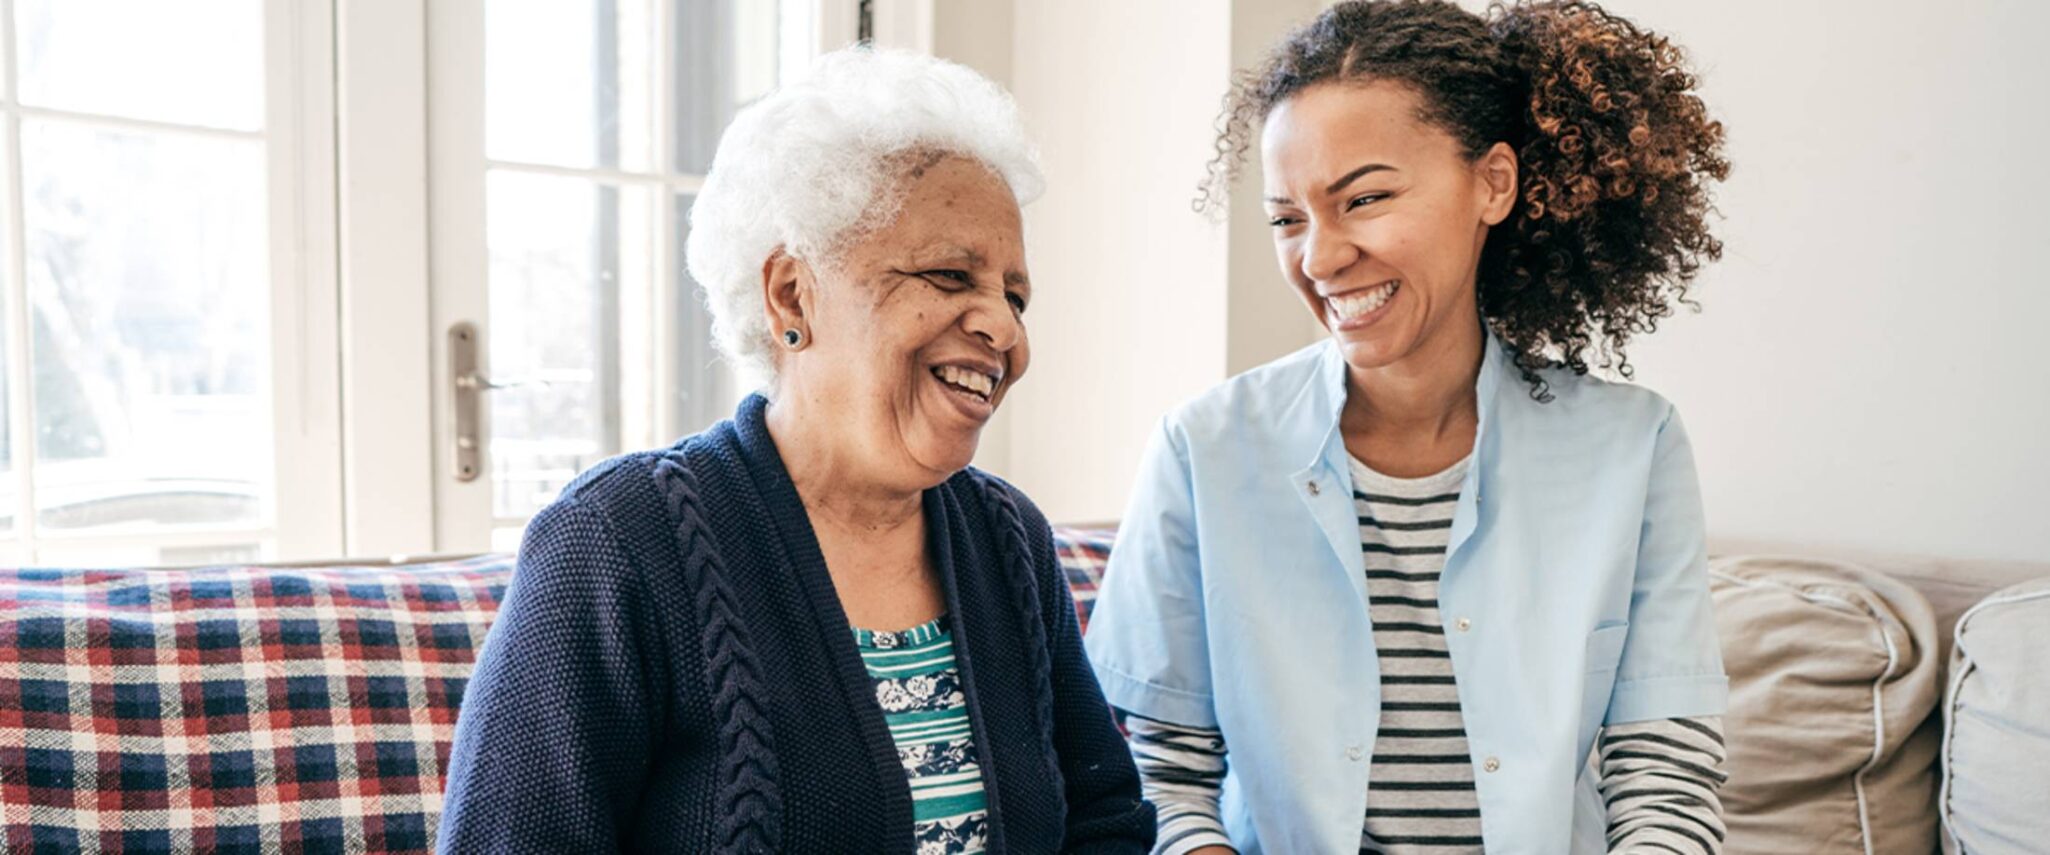 healthcare worker laughs with an elderly woman